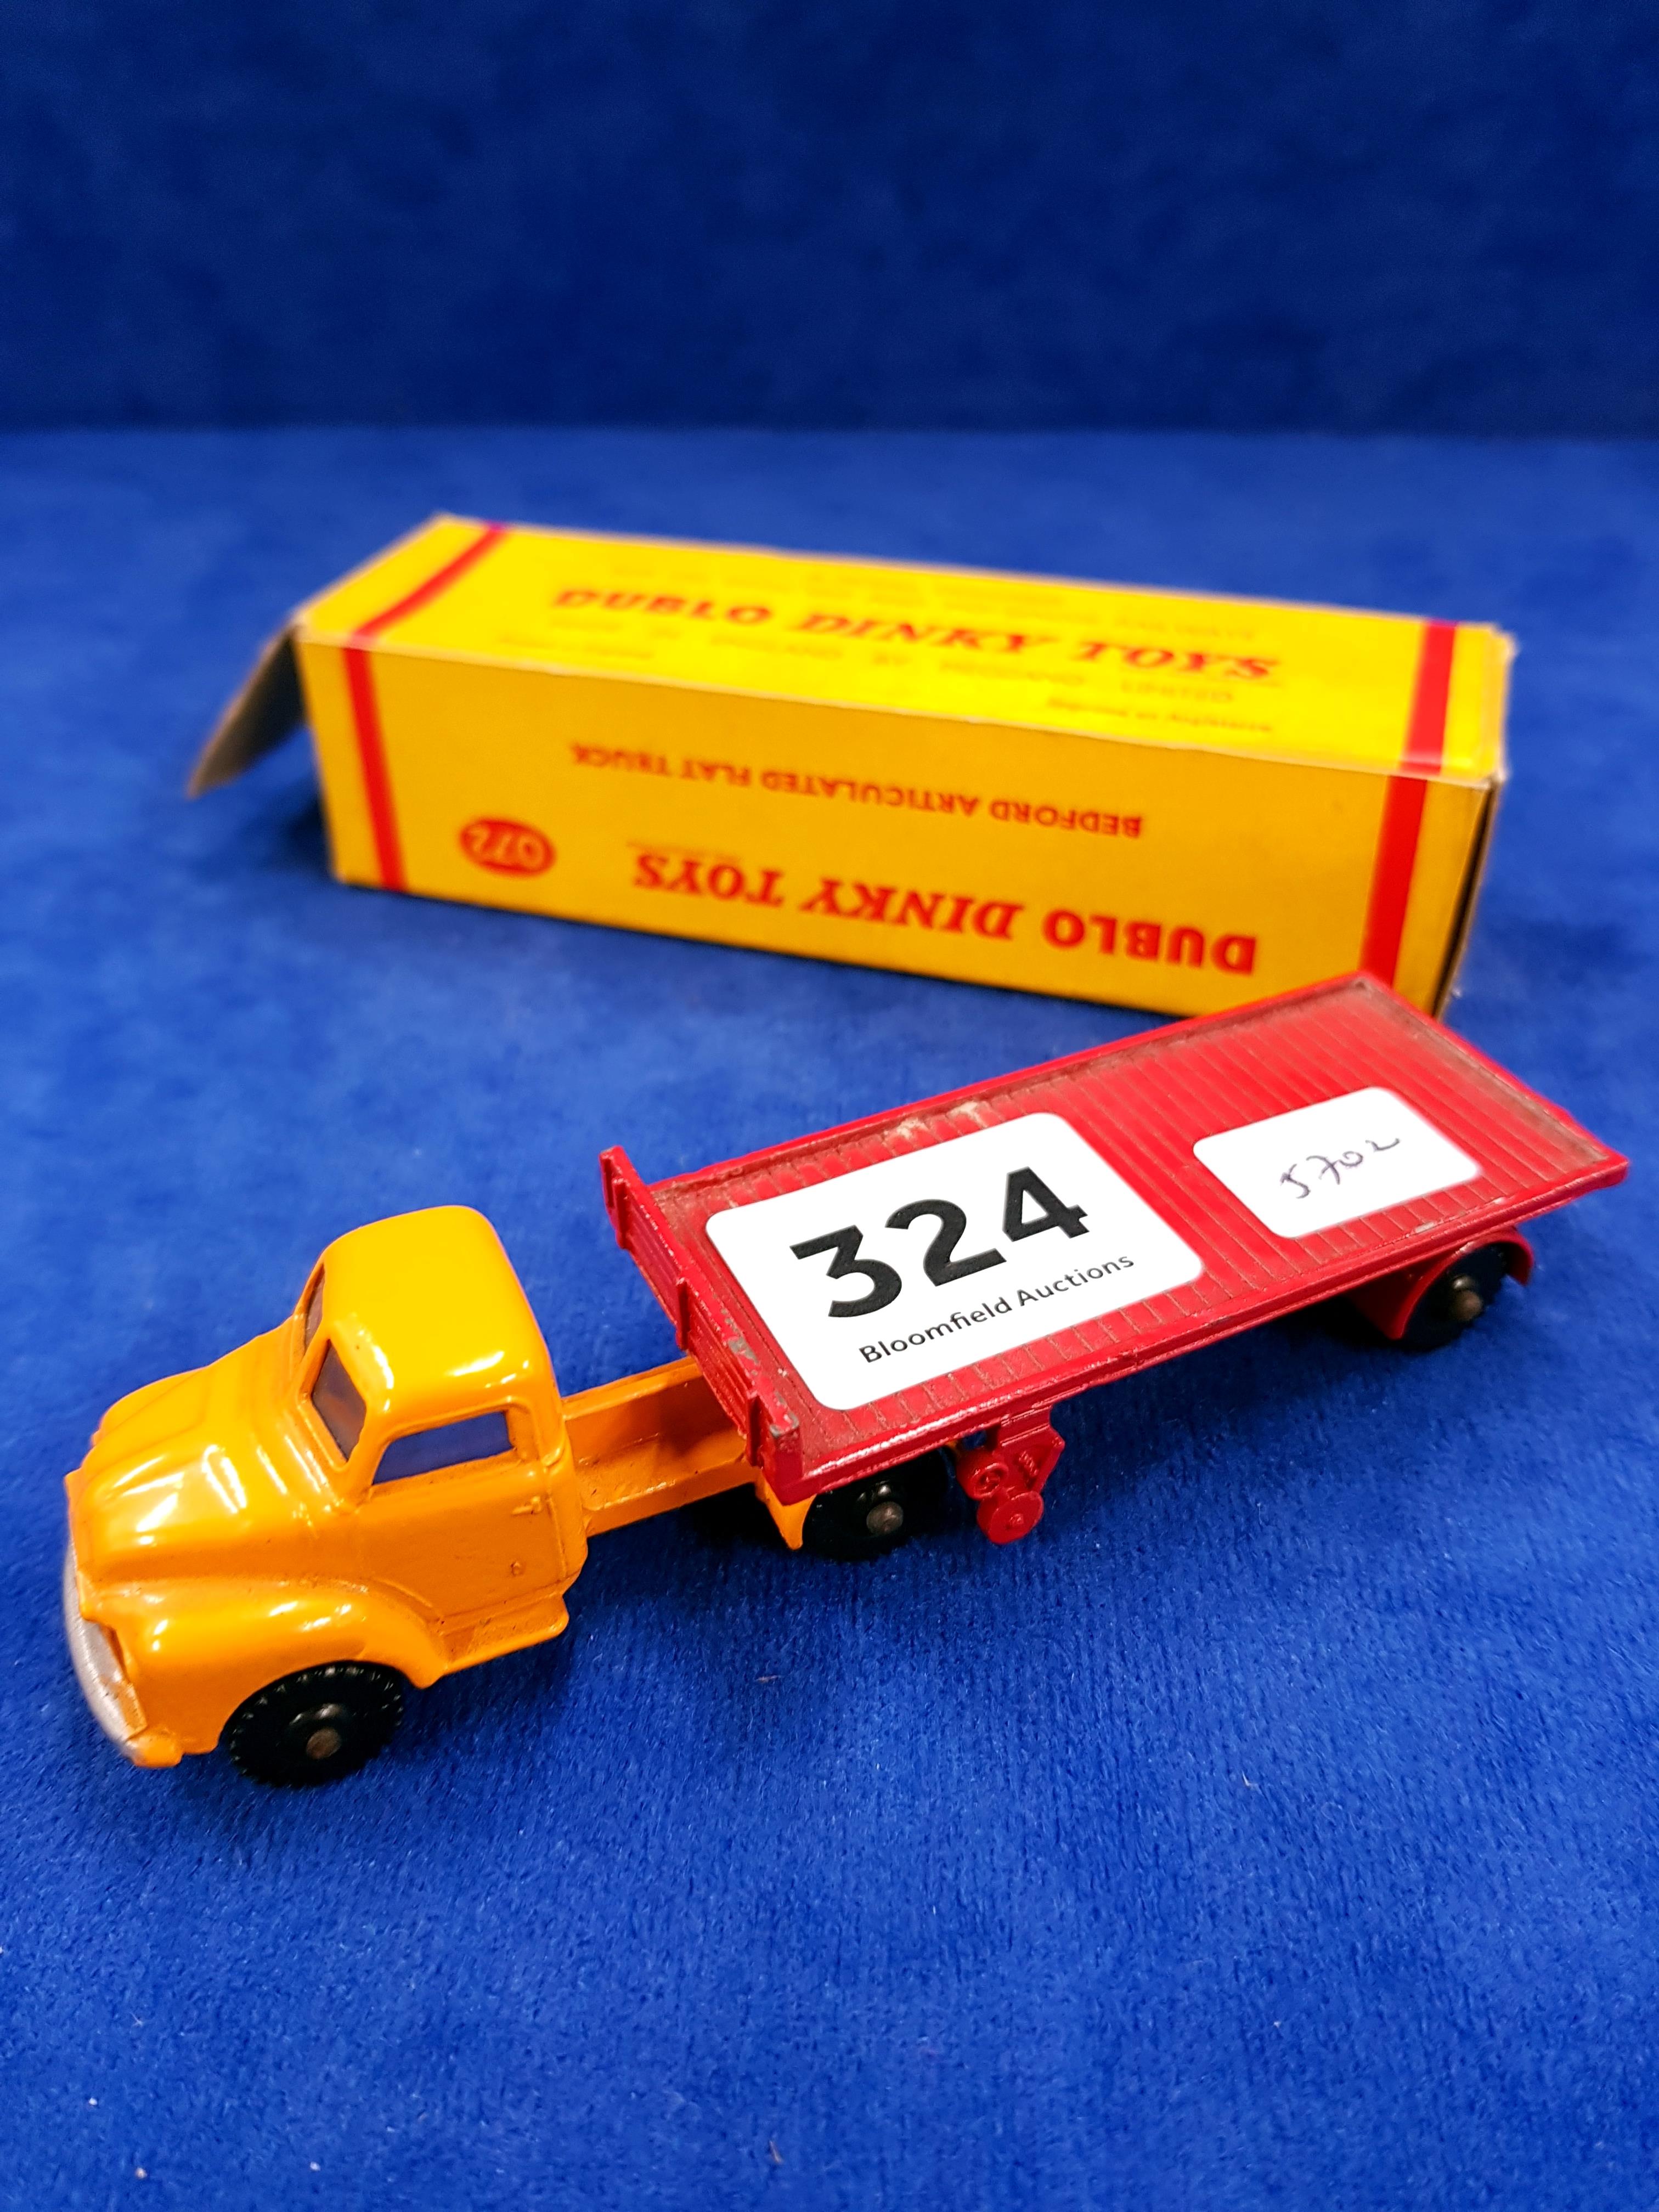 DUBLO DINKY BEDFORD ARTICULATED FLAT TRUCK